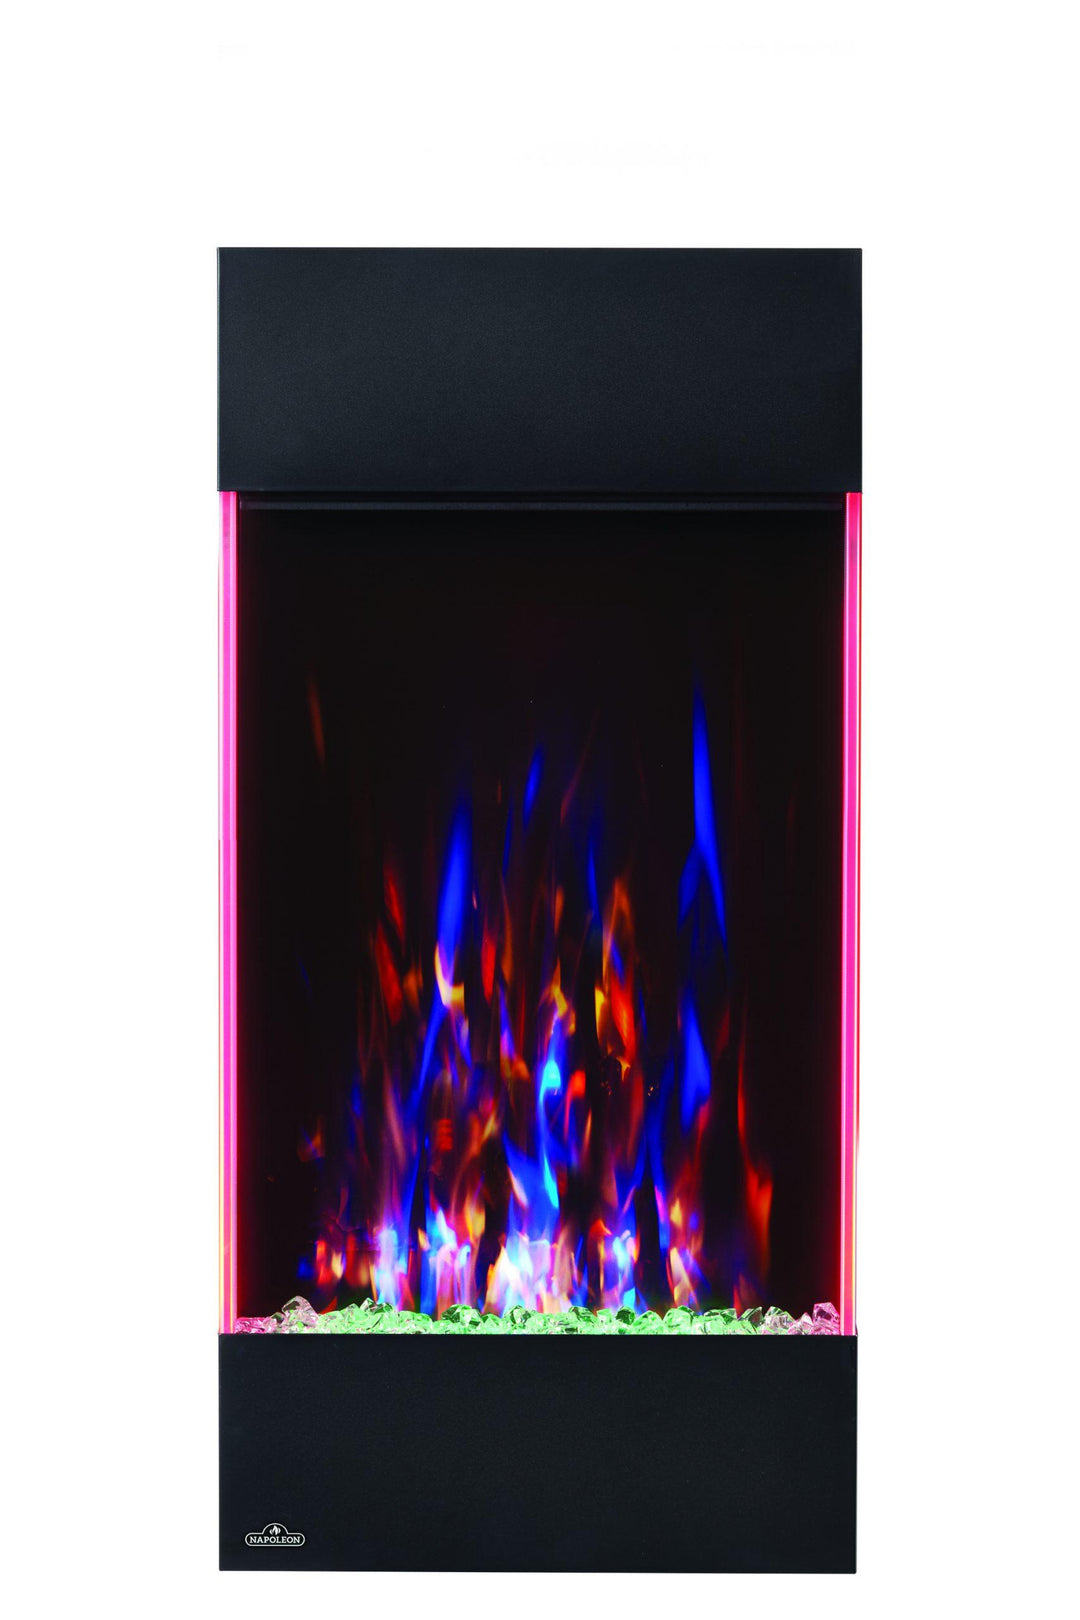 Napoleon Allure Vertical 32" Electric fireplace with pink accent, green embers, and red and blue flames